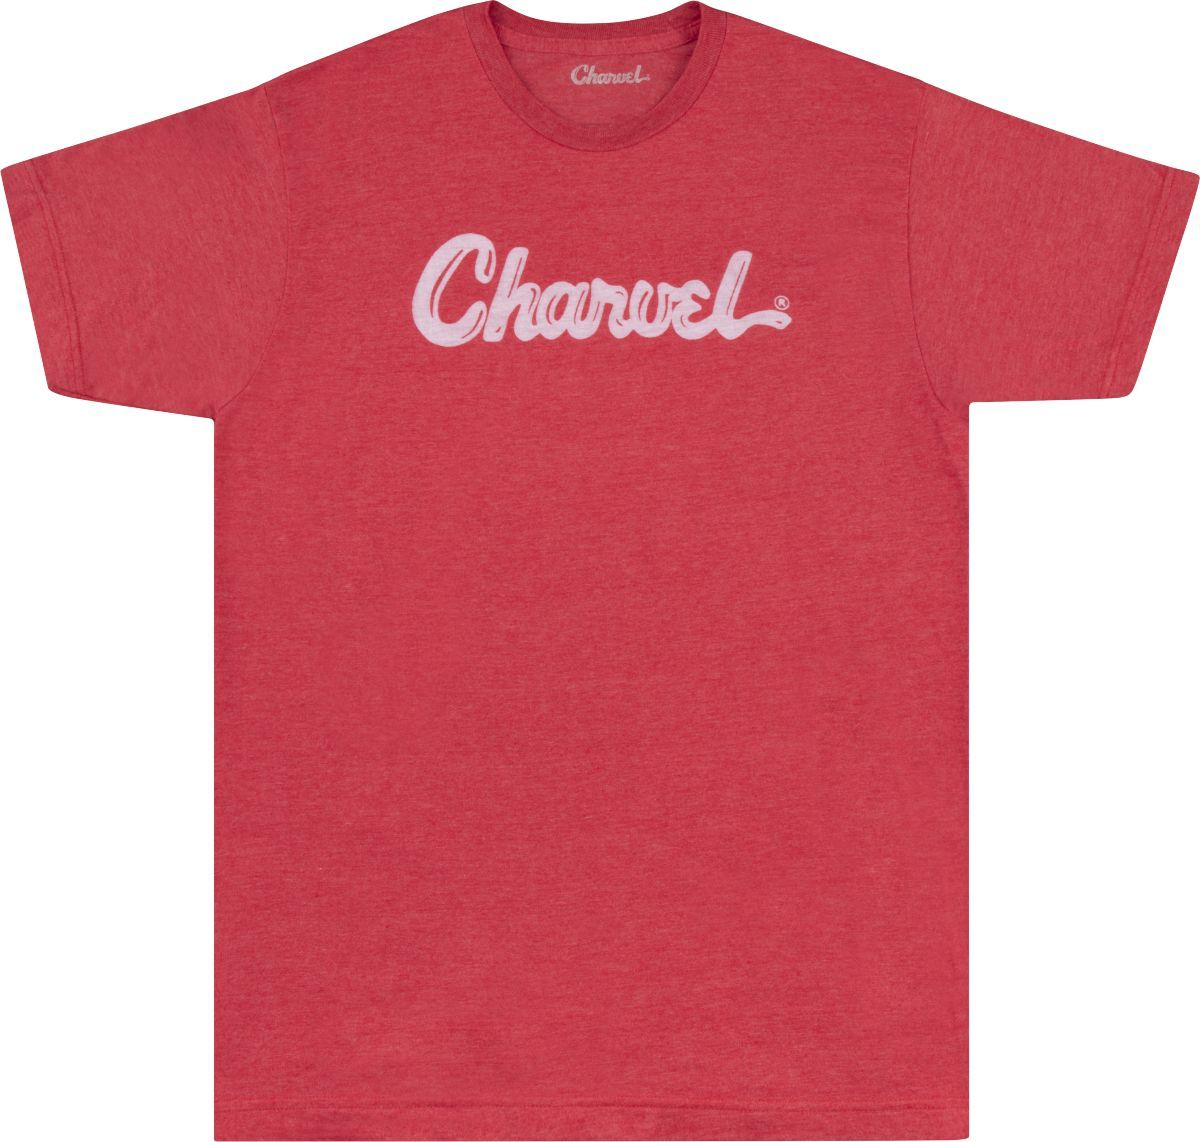 Charvel Toothpaste Logo T-Shirt Heather Red XL